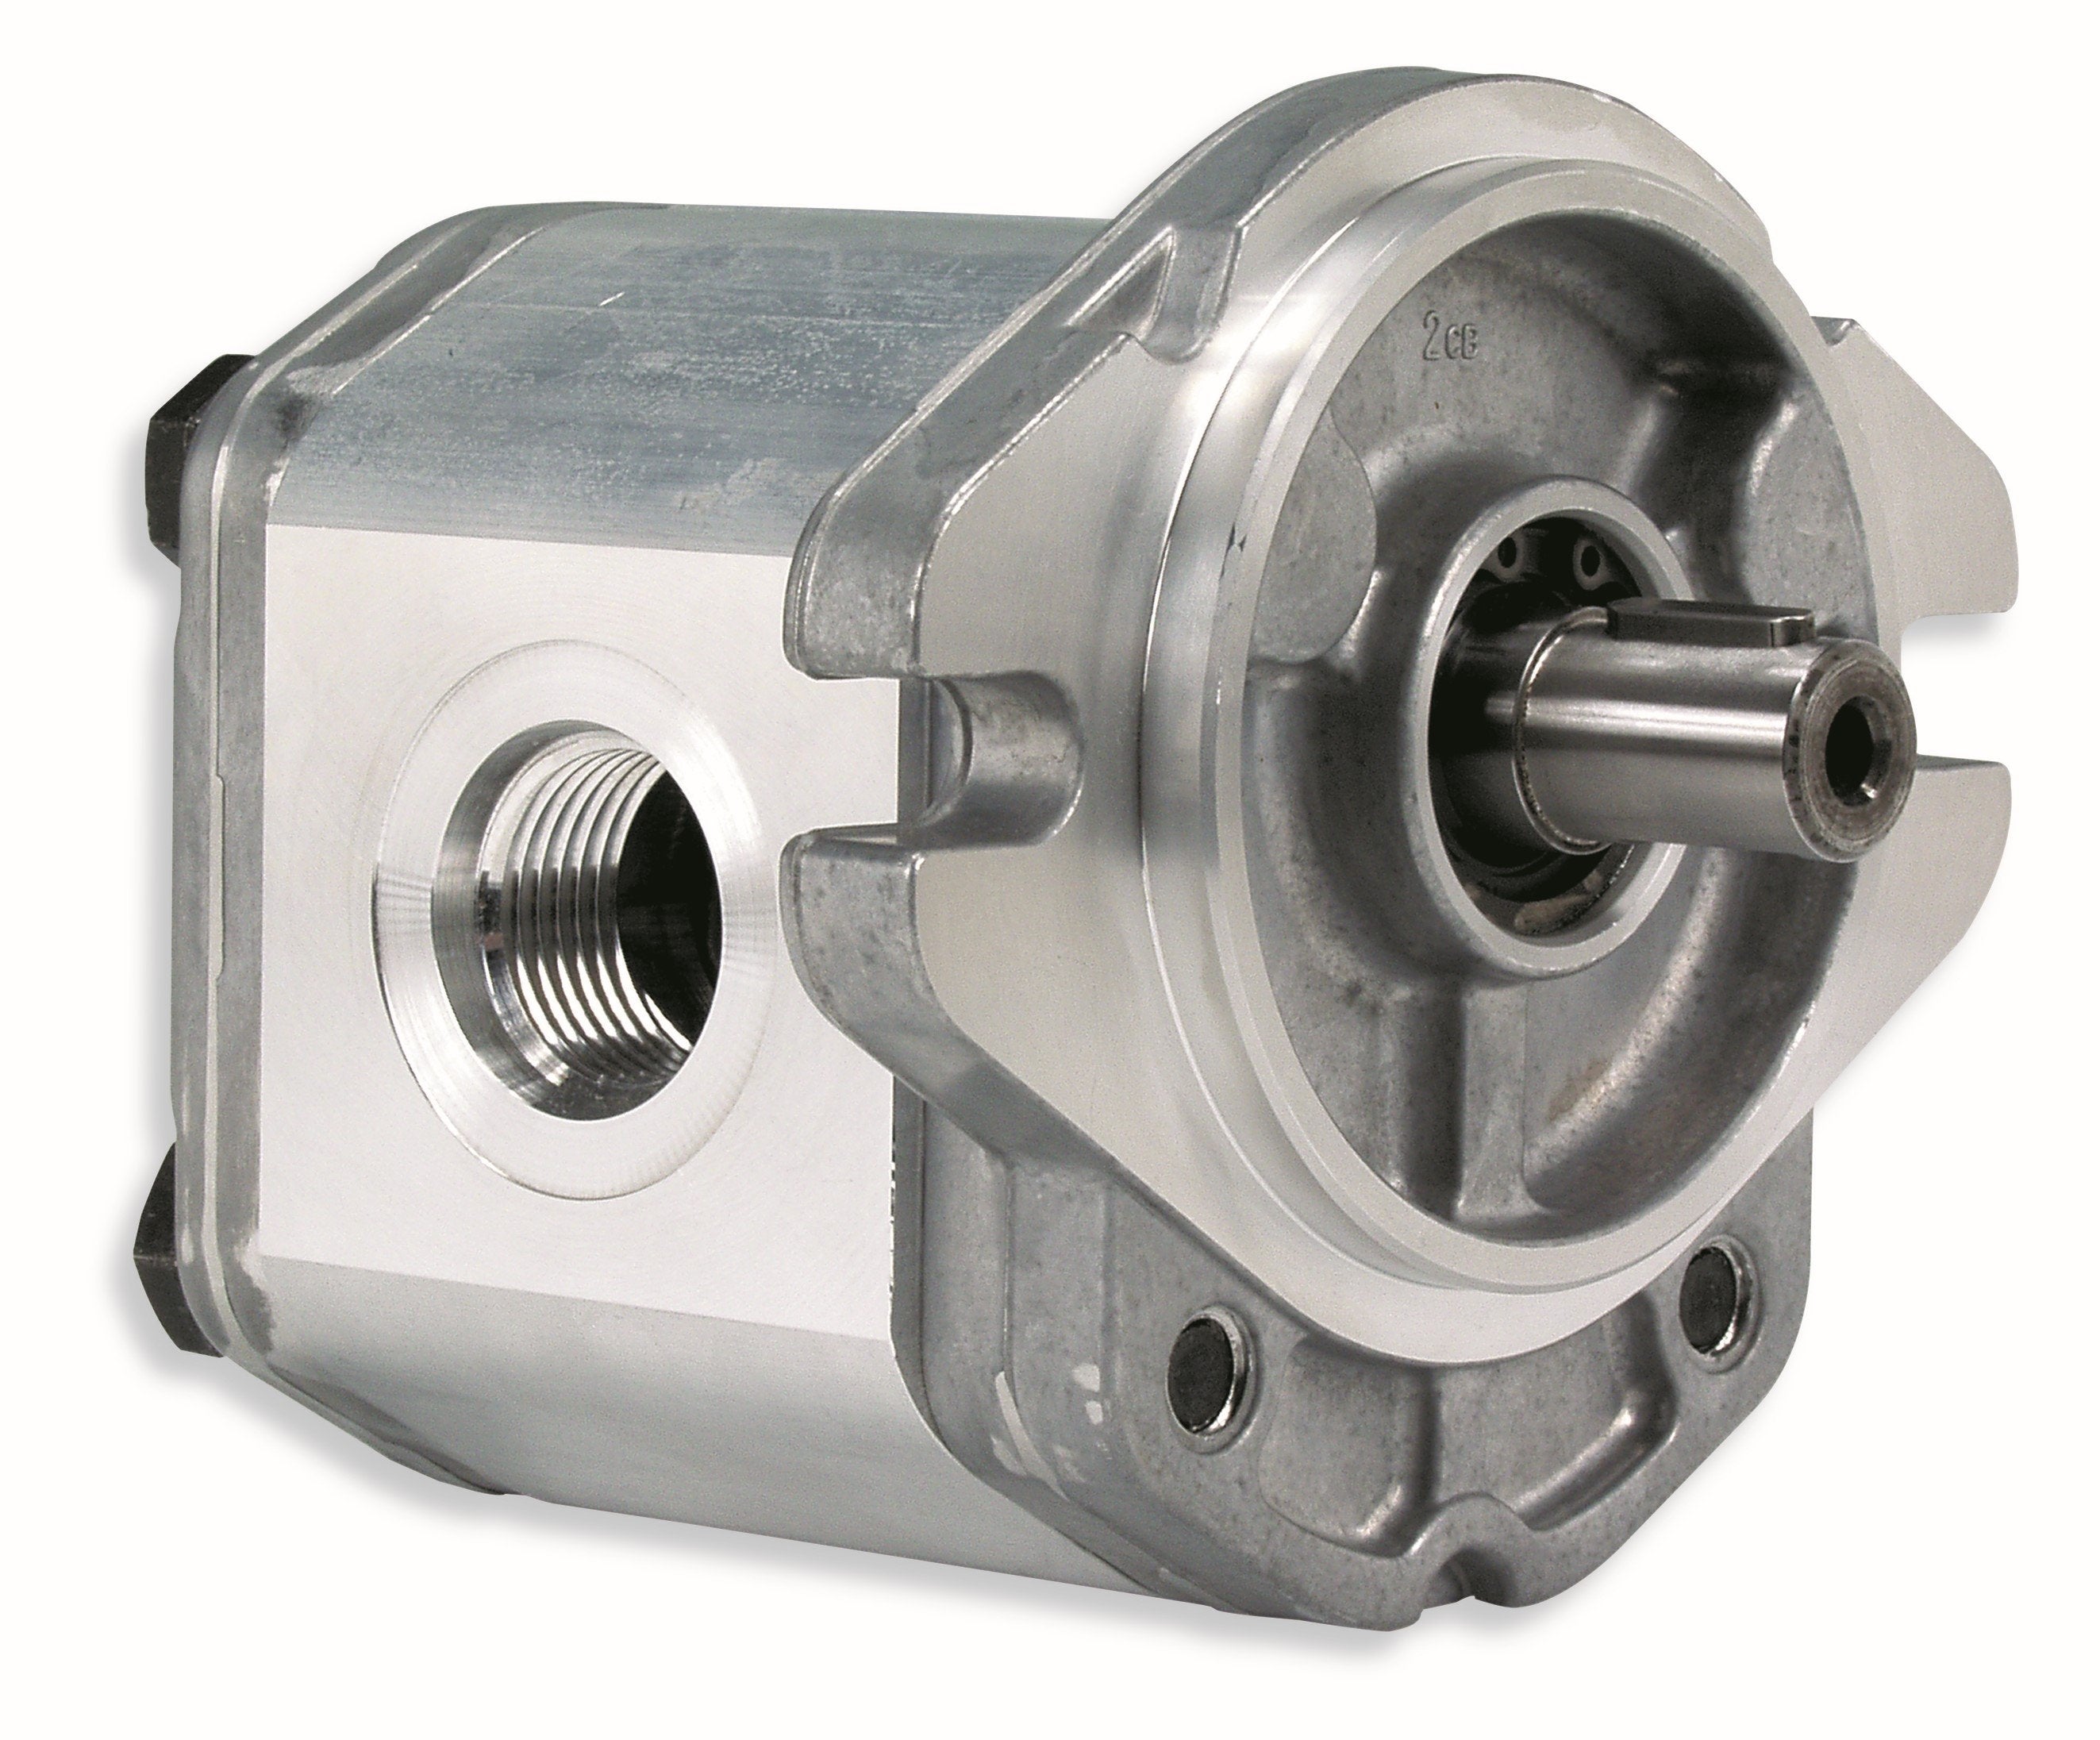 GHM2A-R-22-E2 : Marzocchi Gear Motor, Bidirectional, 16cc, 3770psi rated, 2800RPM, 0.75 (3/4") #12 SAE ports, 5/8" Bore x 5/32" Keyed Shaft